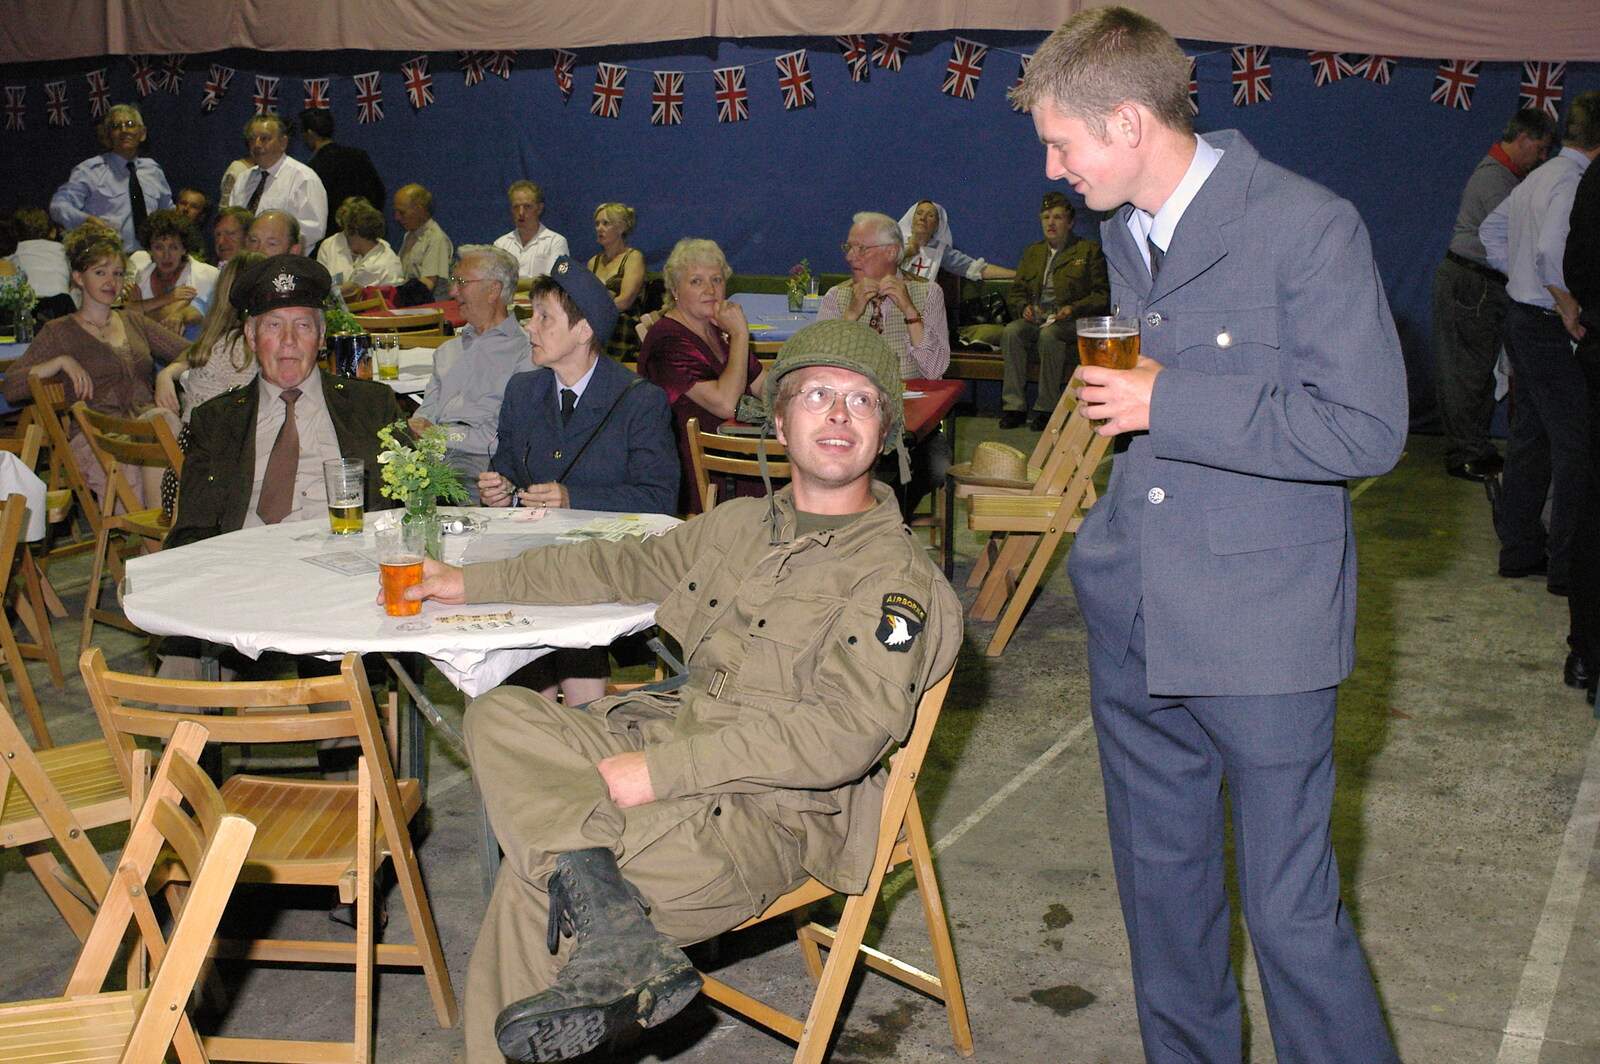 Marc chats to The Boy Phil from Another 1940s Dance, Ellough Airfield, Beccles, Suffolk - 24th June 2005